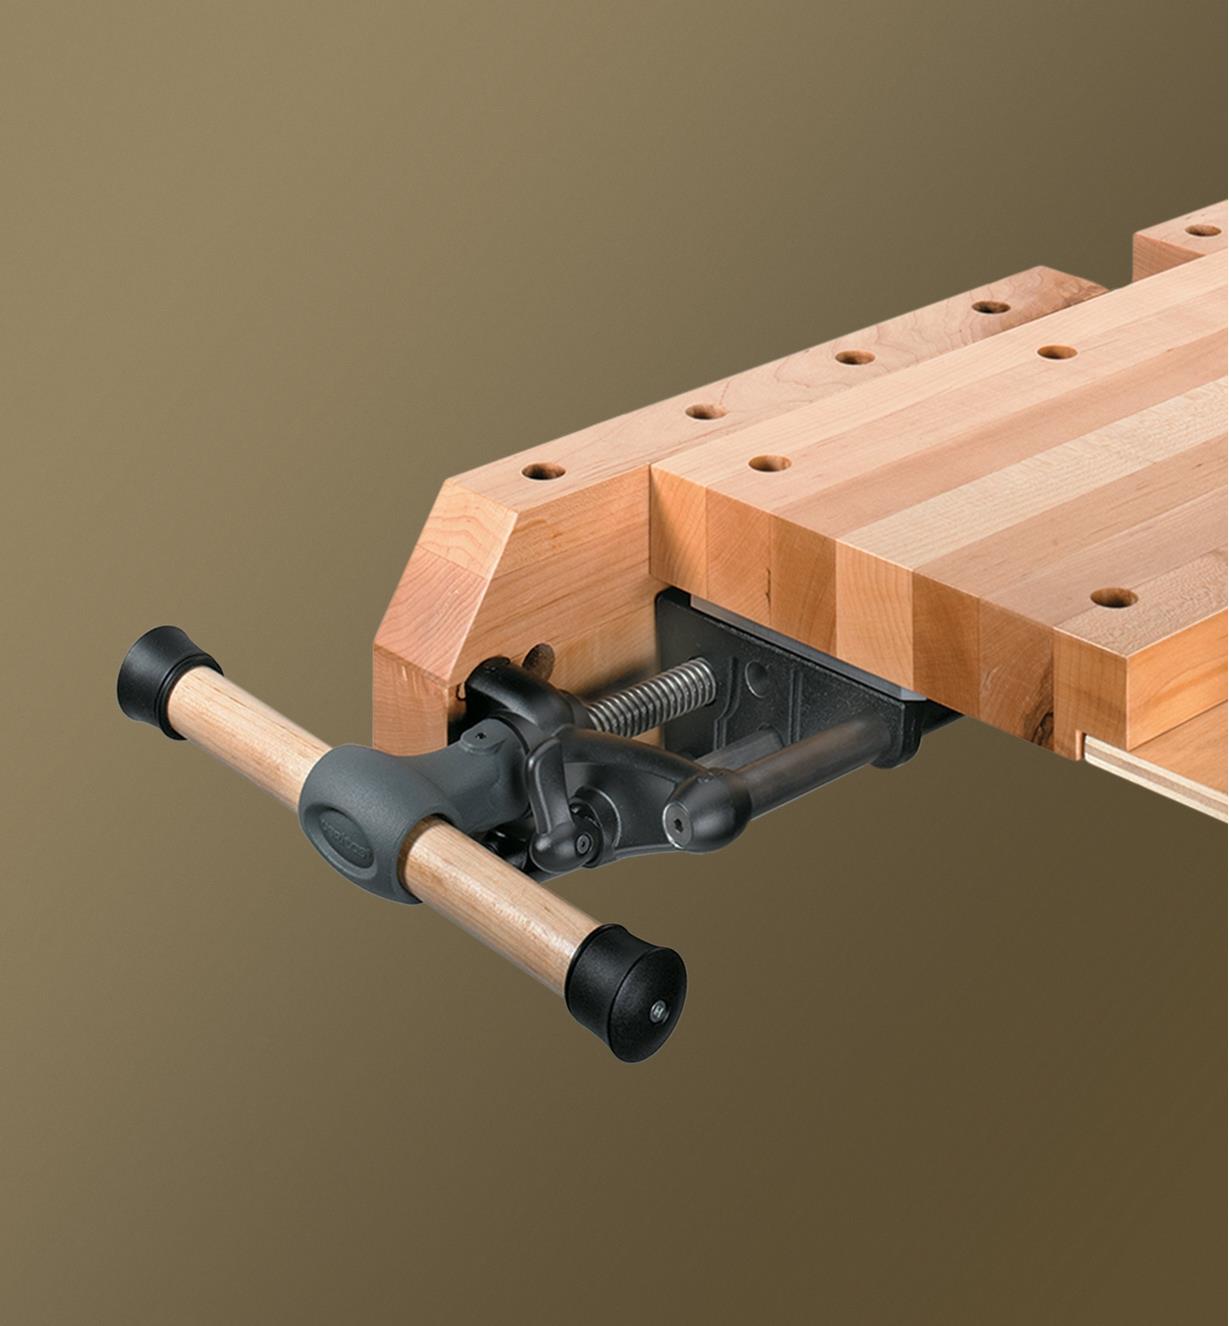 A Veritas quick-release sliding tail vise mounted at the end of a workbench